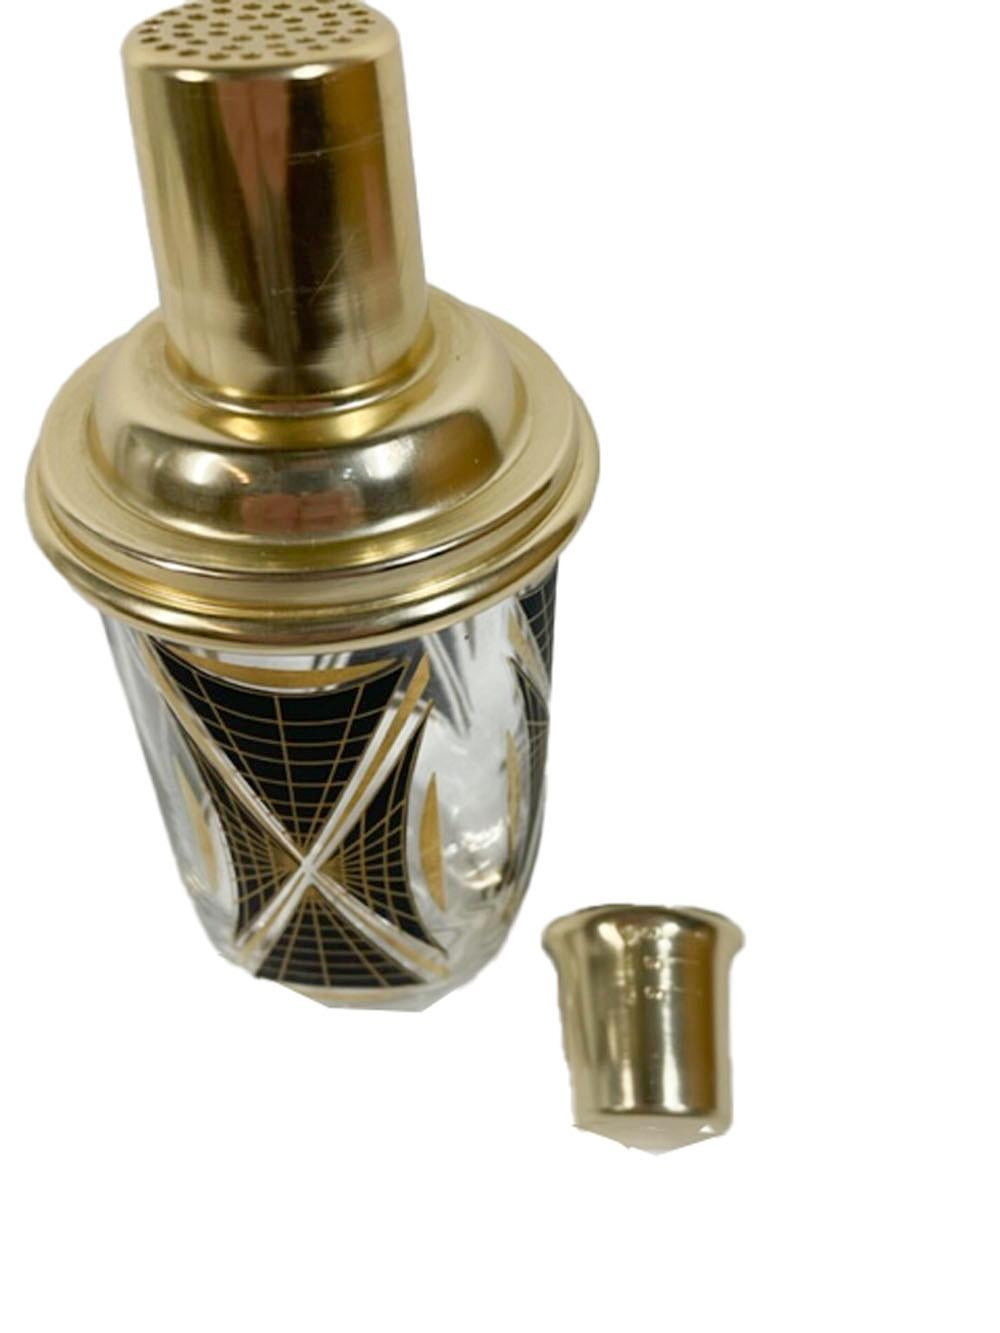 20th Century Vintage Atomic Period Cocktail Shaker with Black and Gold Decoration